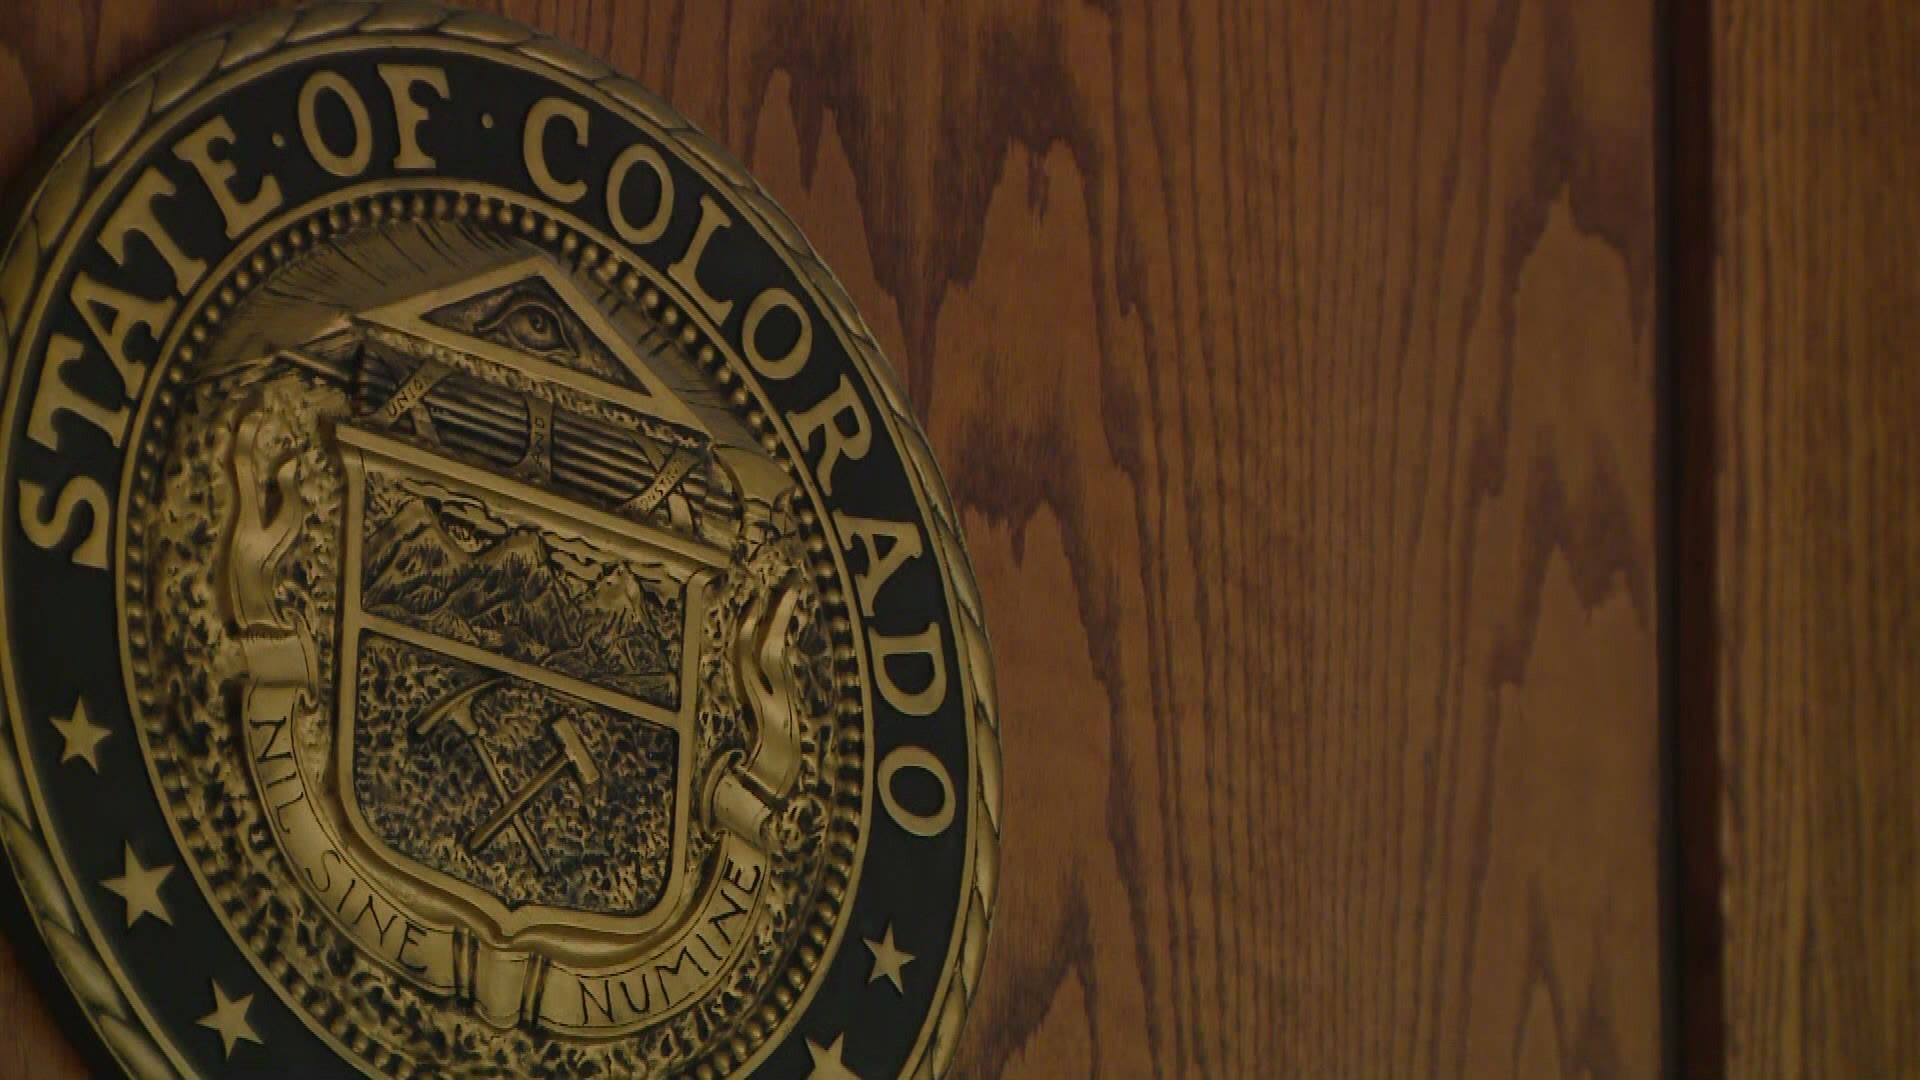 The Chaffee County District Court judge did not allow the recording of audio in the hearing.